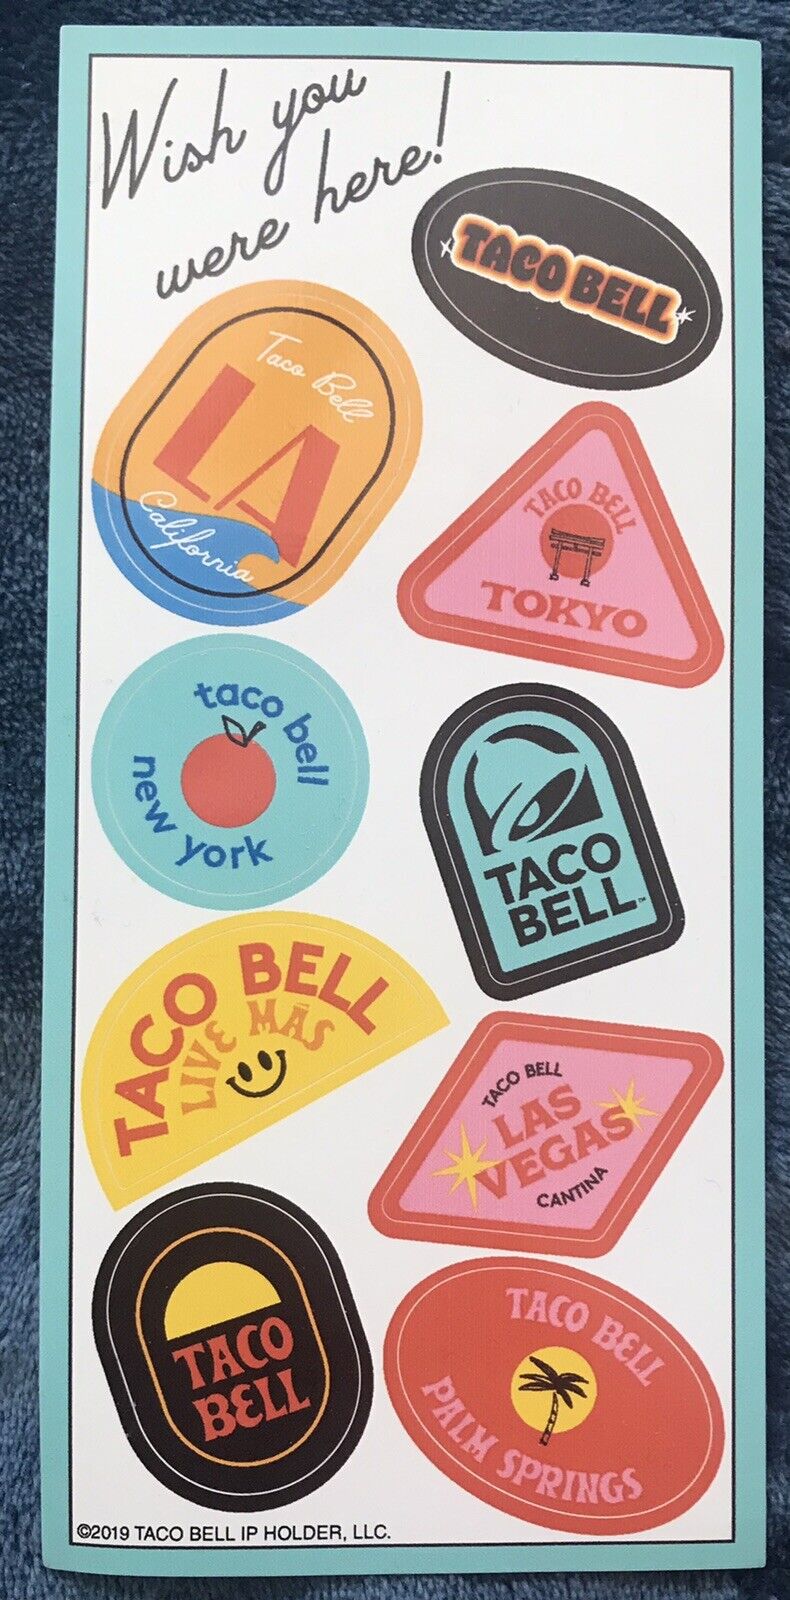 TACO BELL-￼Wish you were here stickers LA, NY, TOYKO, LAS VEGAS, PALM SPRINGS